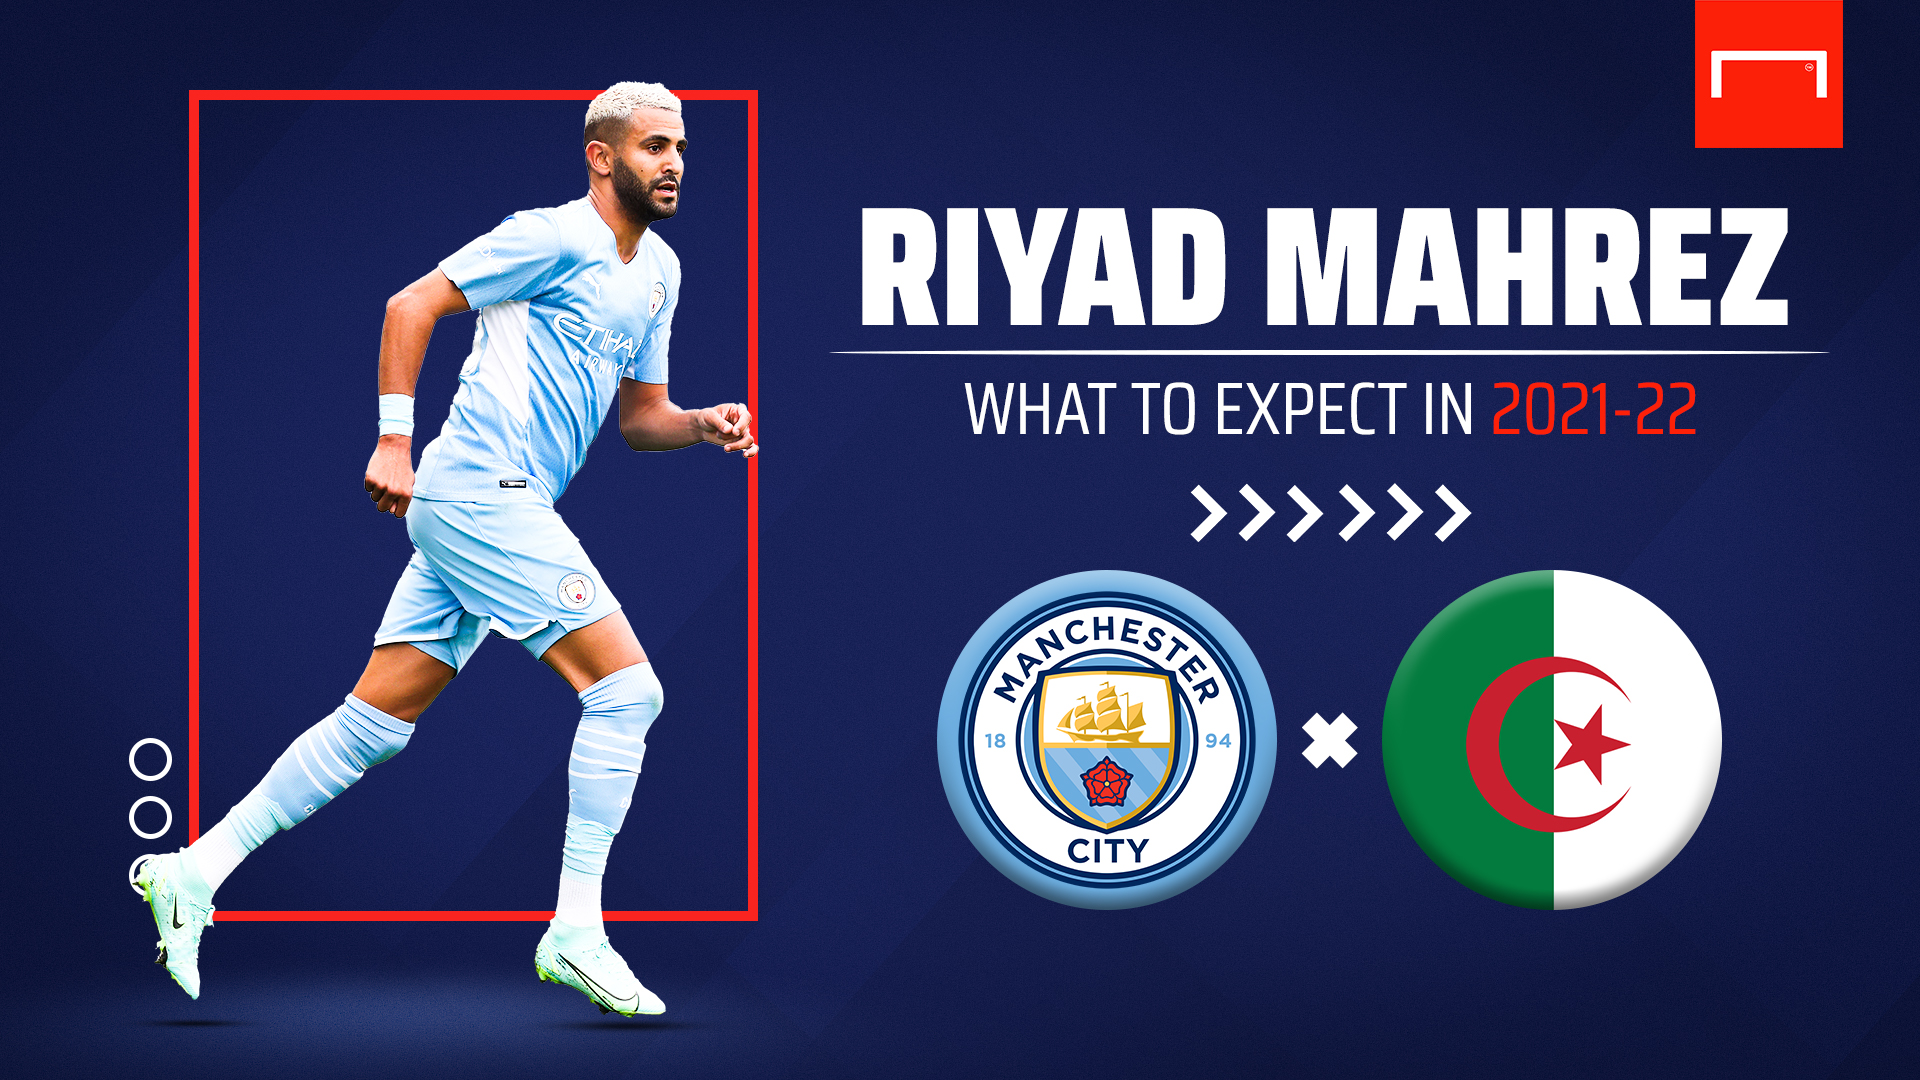 Riyad Mahrez: What to expect in 2021-22